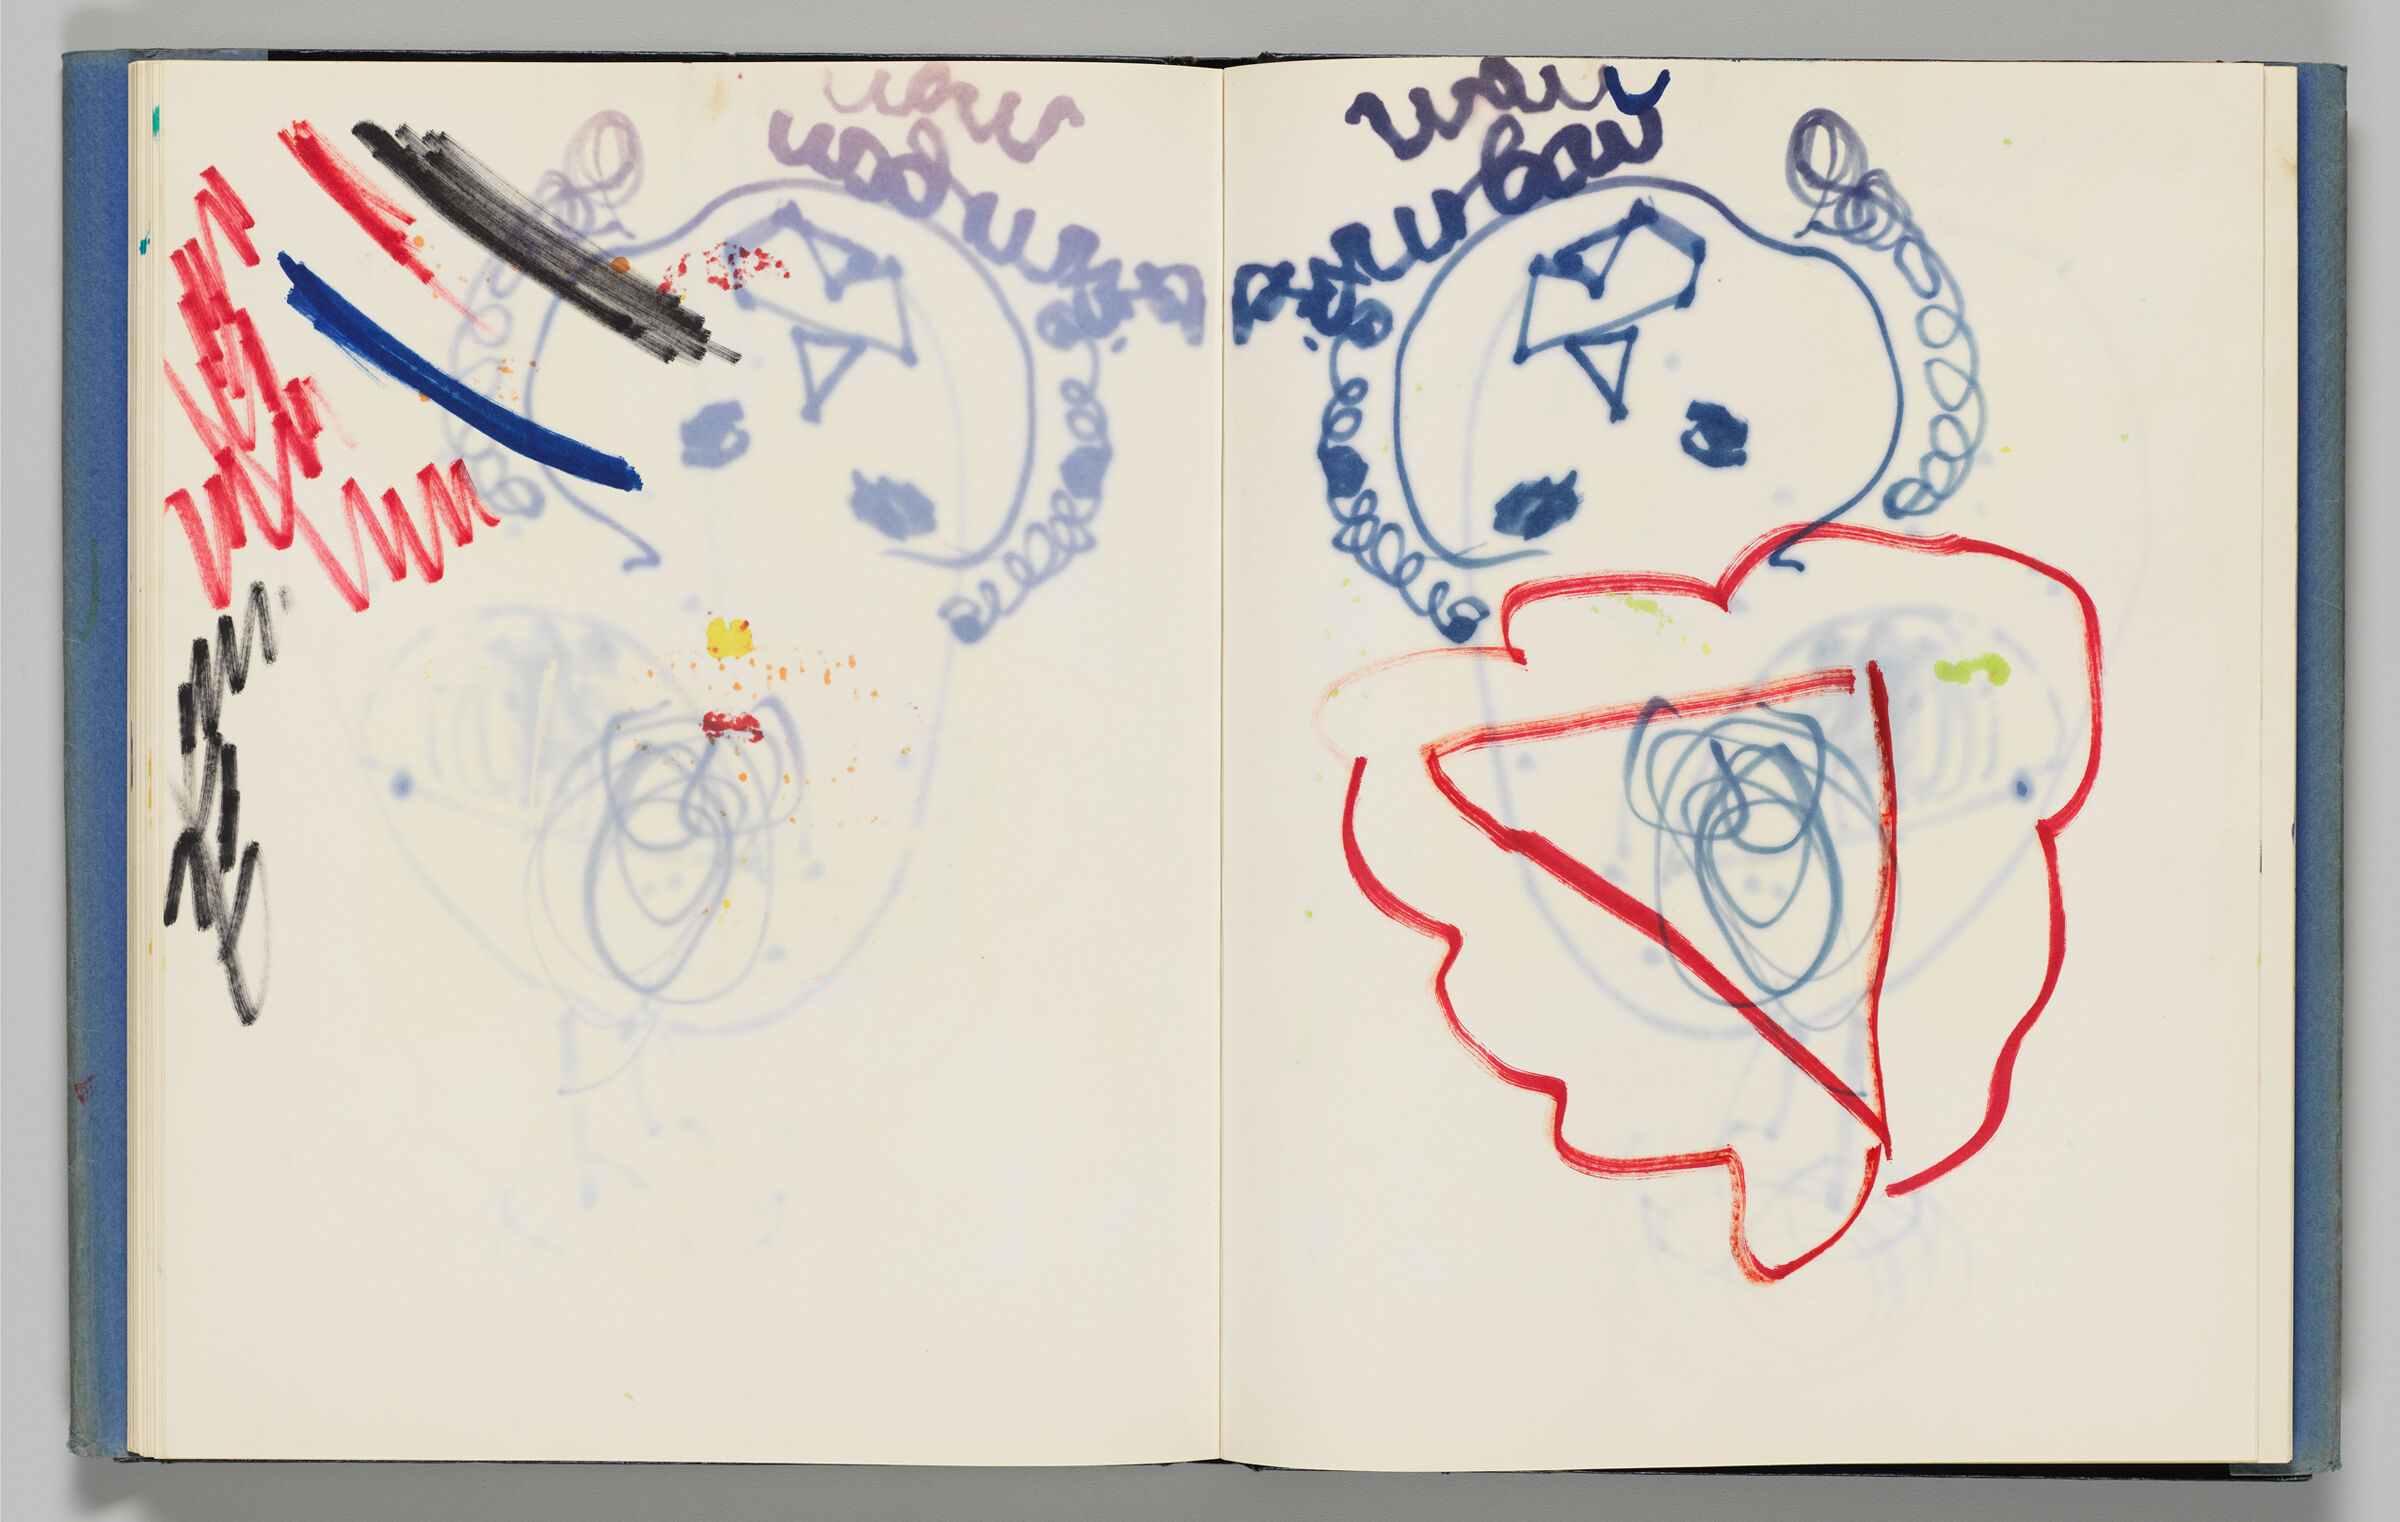 Untitled (Marker Test With Color Transfer, Left Page); Untitled (Child's Drawing With Bleed-Through Of Previous Page And Color Transfer, Right Page)